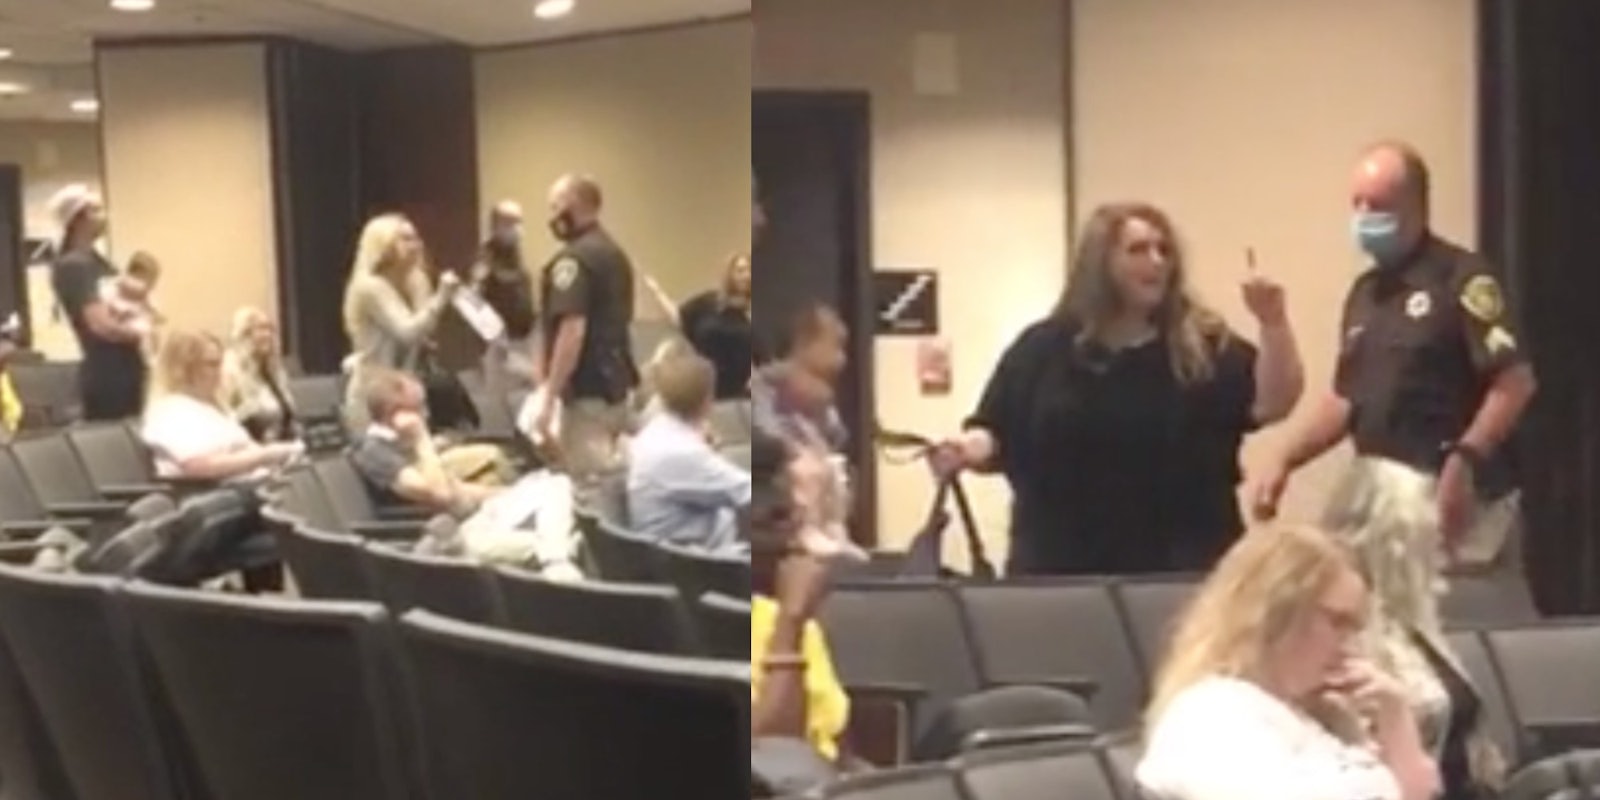 Two anti-masker Karens are escorted out of Omaha city council meeting